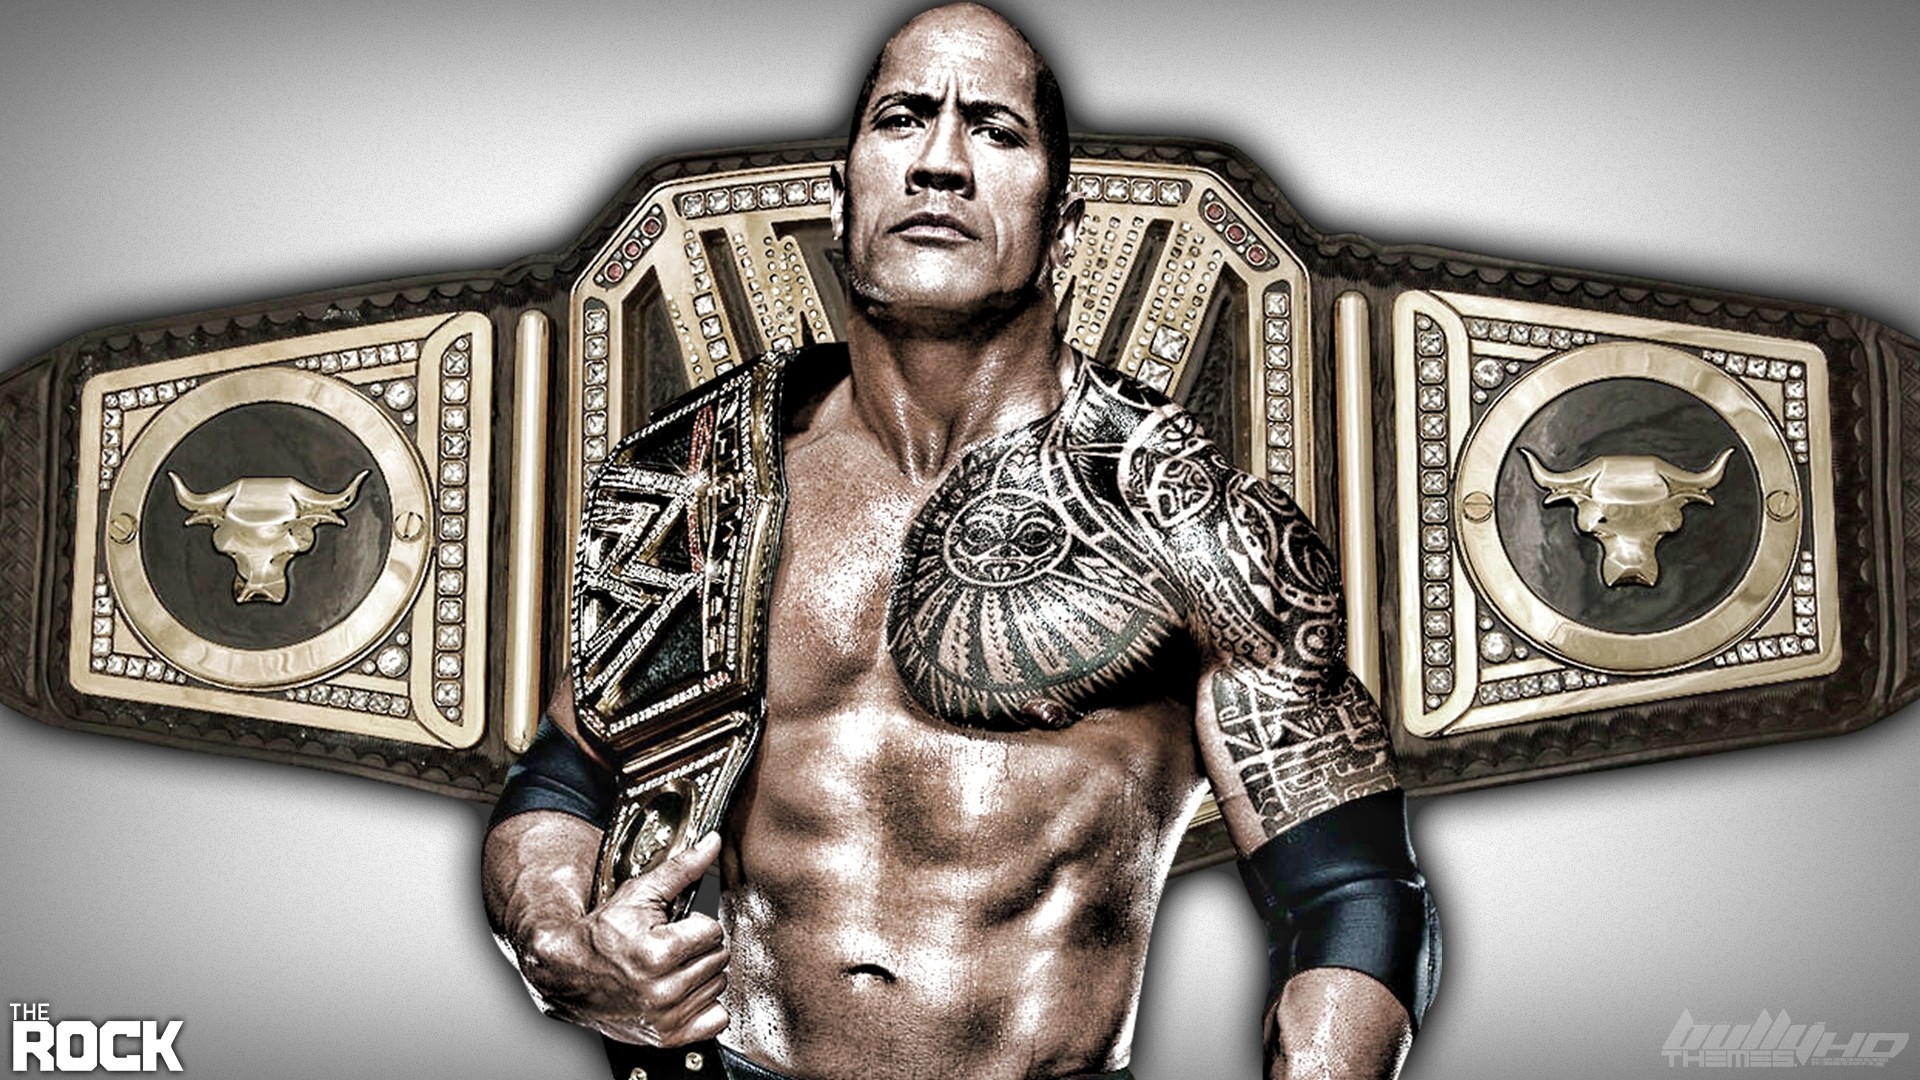 1920x1080 The Rock with the WWE Championship. (wallpaper HD) | David's wrestling |  Pinterest | Hd wallpaper and Wallpaper